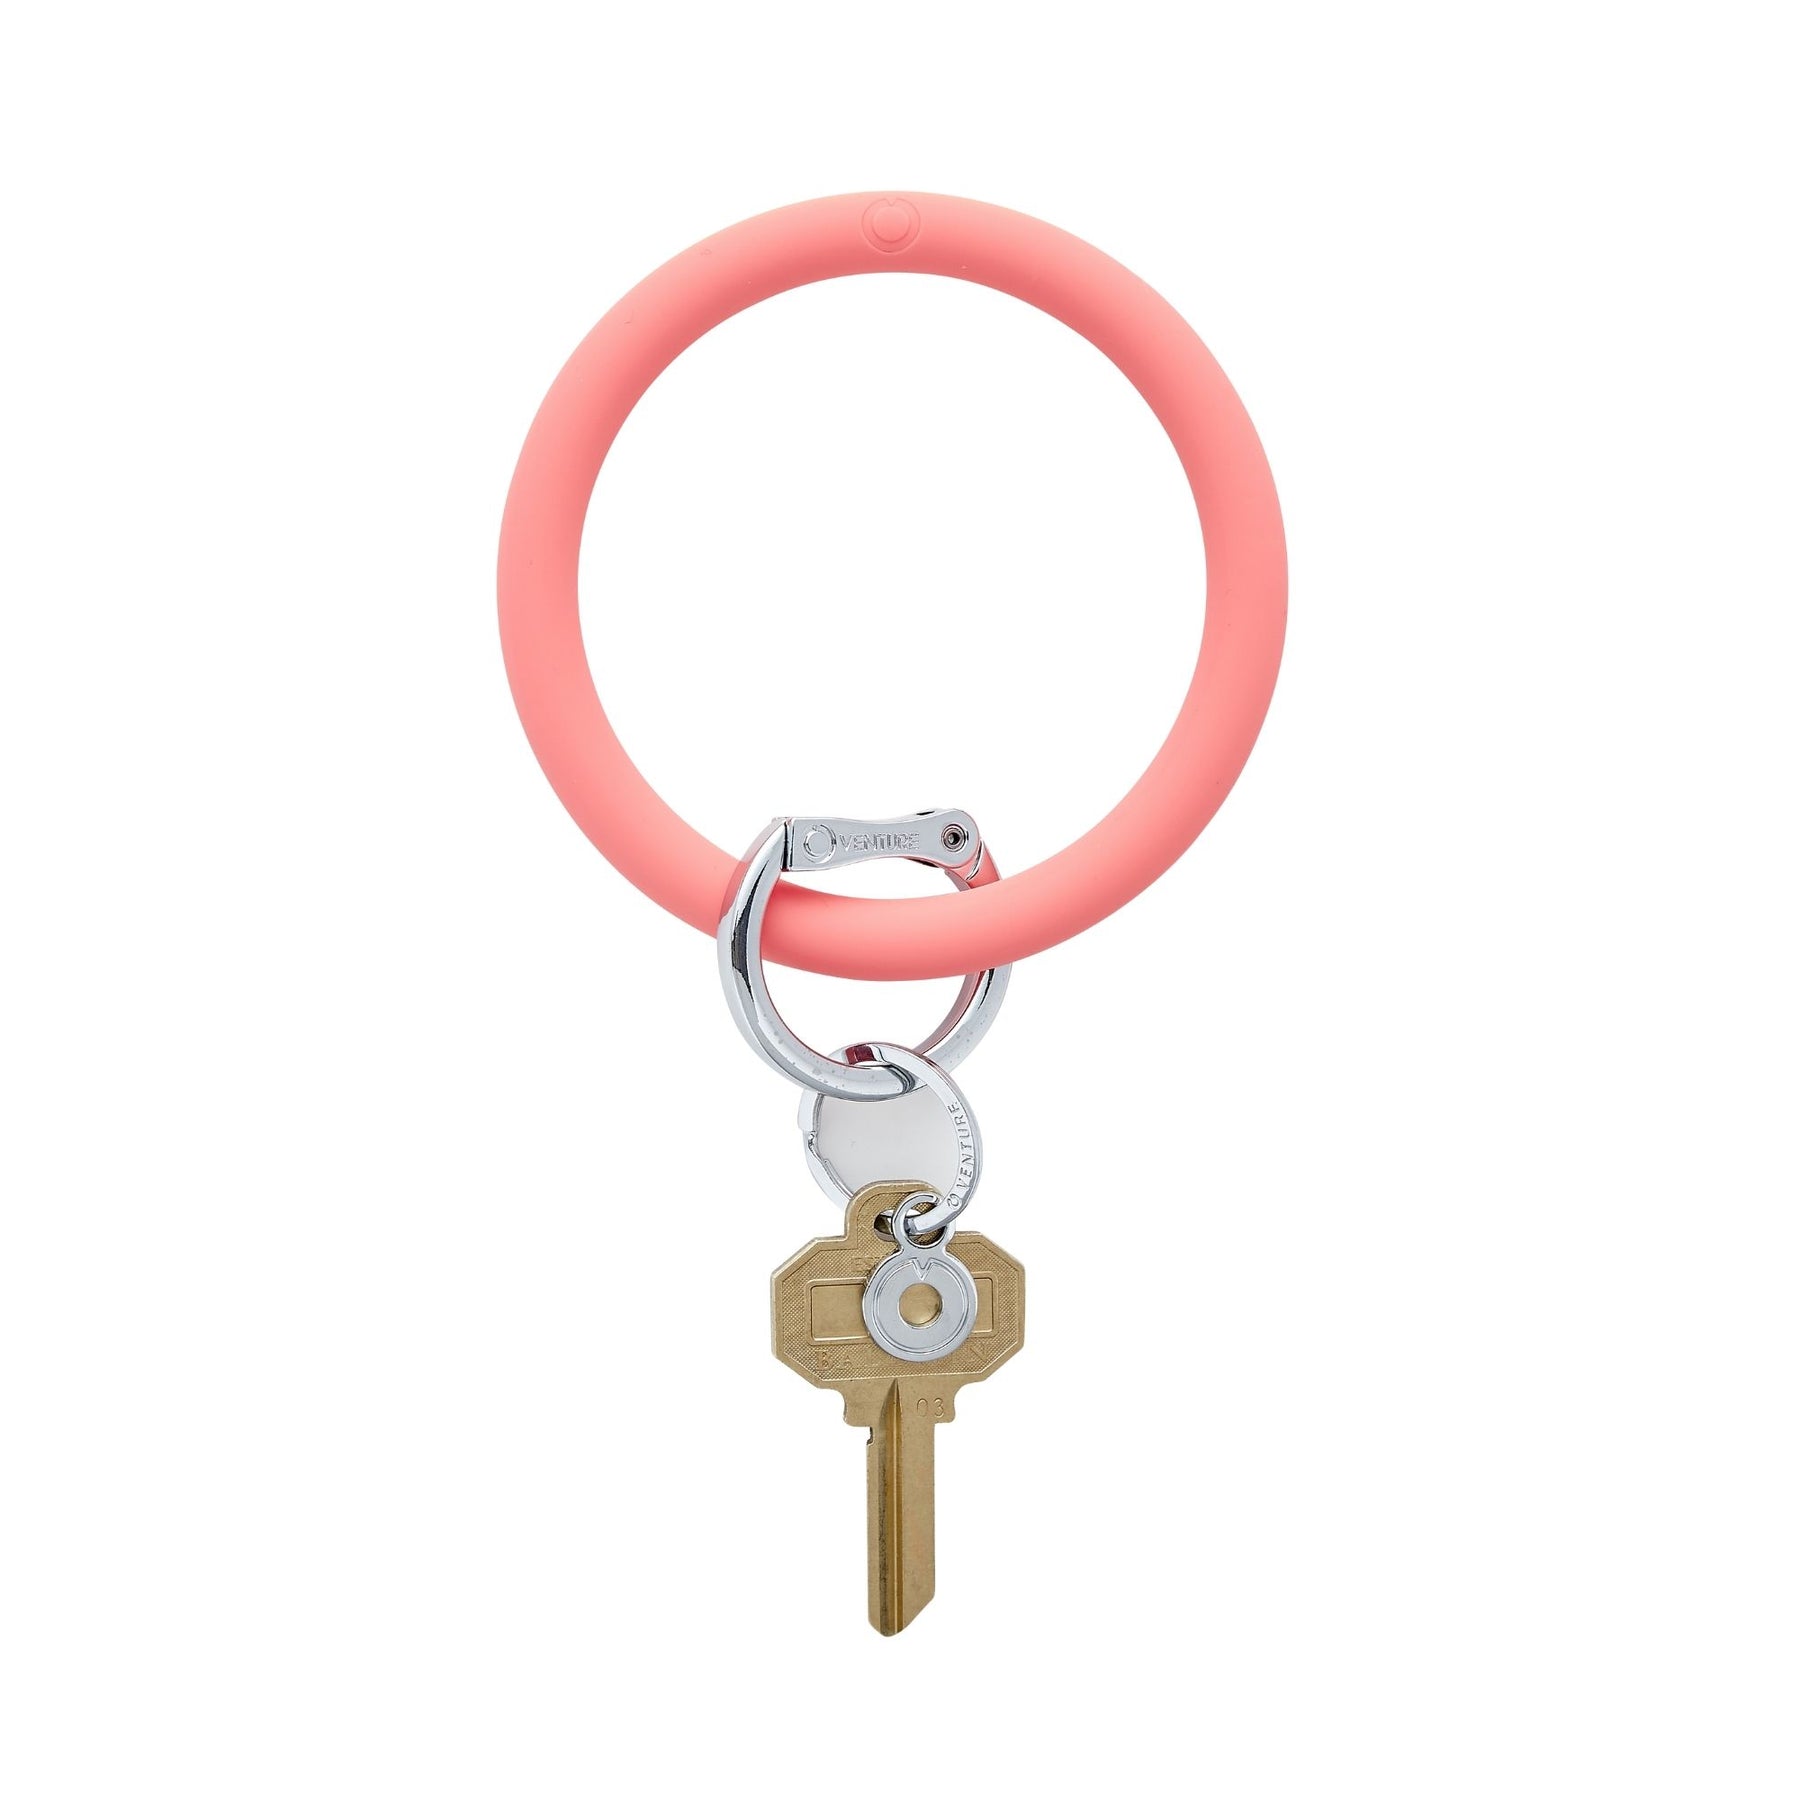 O Venture Pastel Silicone Key Ring Collection